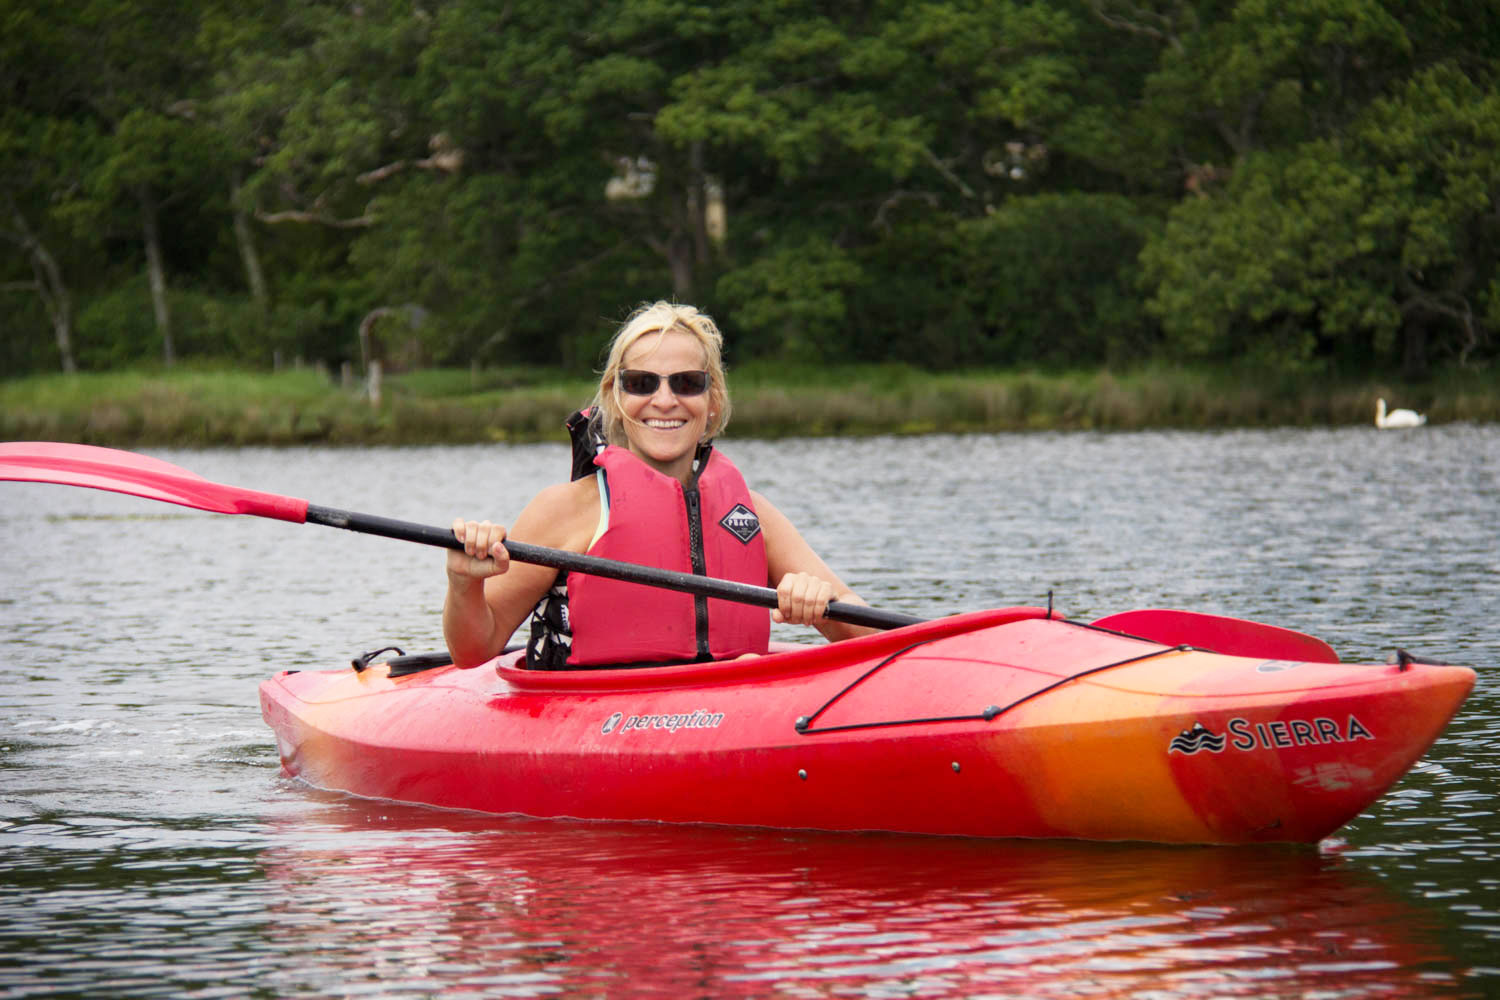 Join our Ladies Only Paddles solo, or with friends. It's up to you!